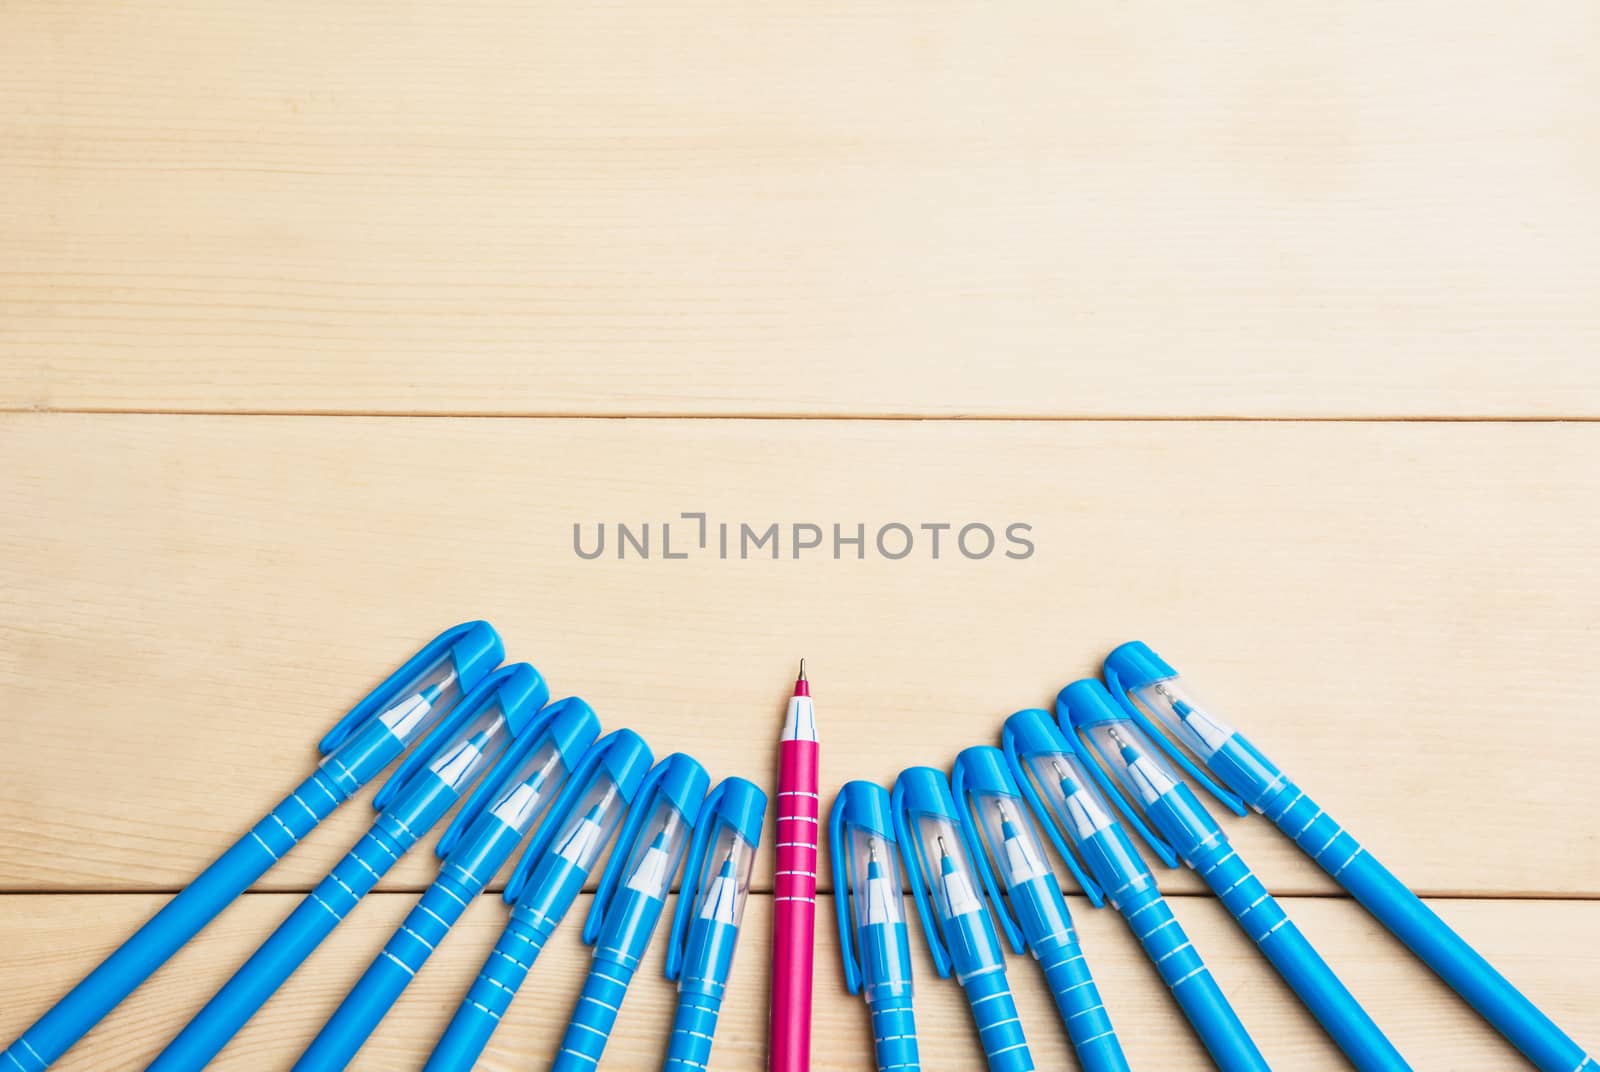 pens or writing tools on wooden table and red pen middle among blue top view